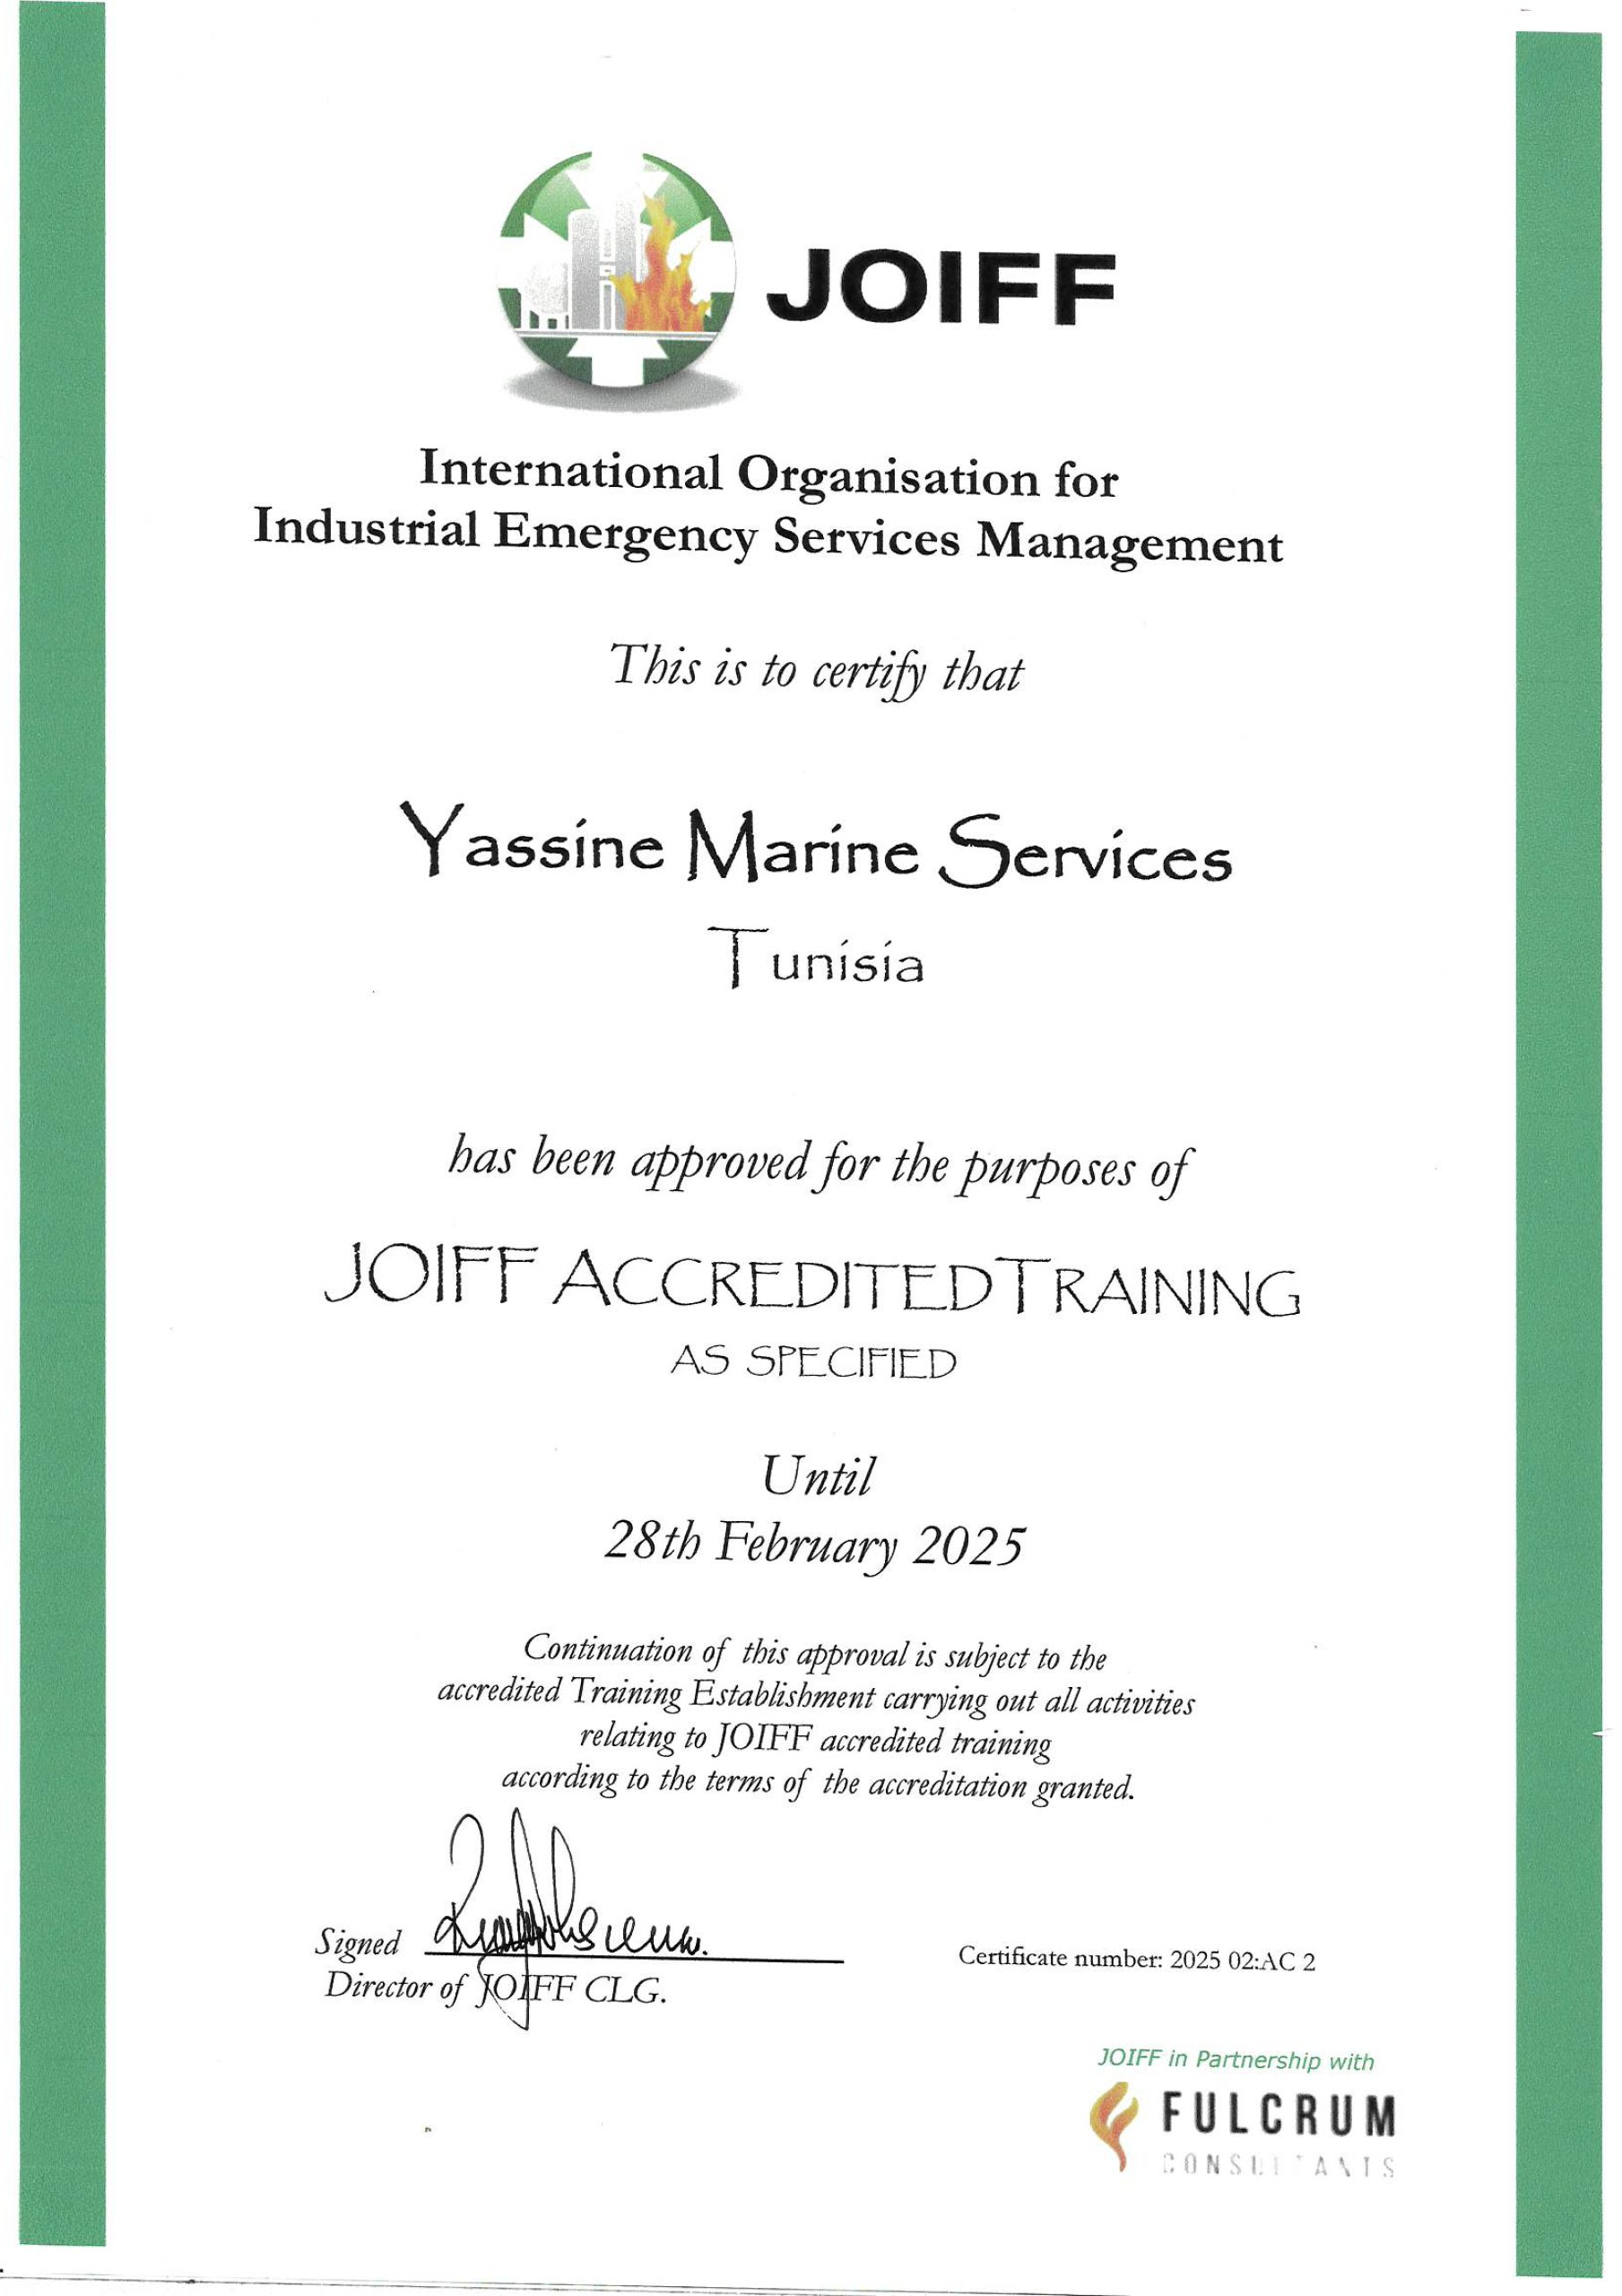 JOIFF accreditation with the successful completion of the on-site JOIFF audit.